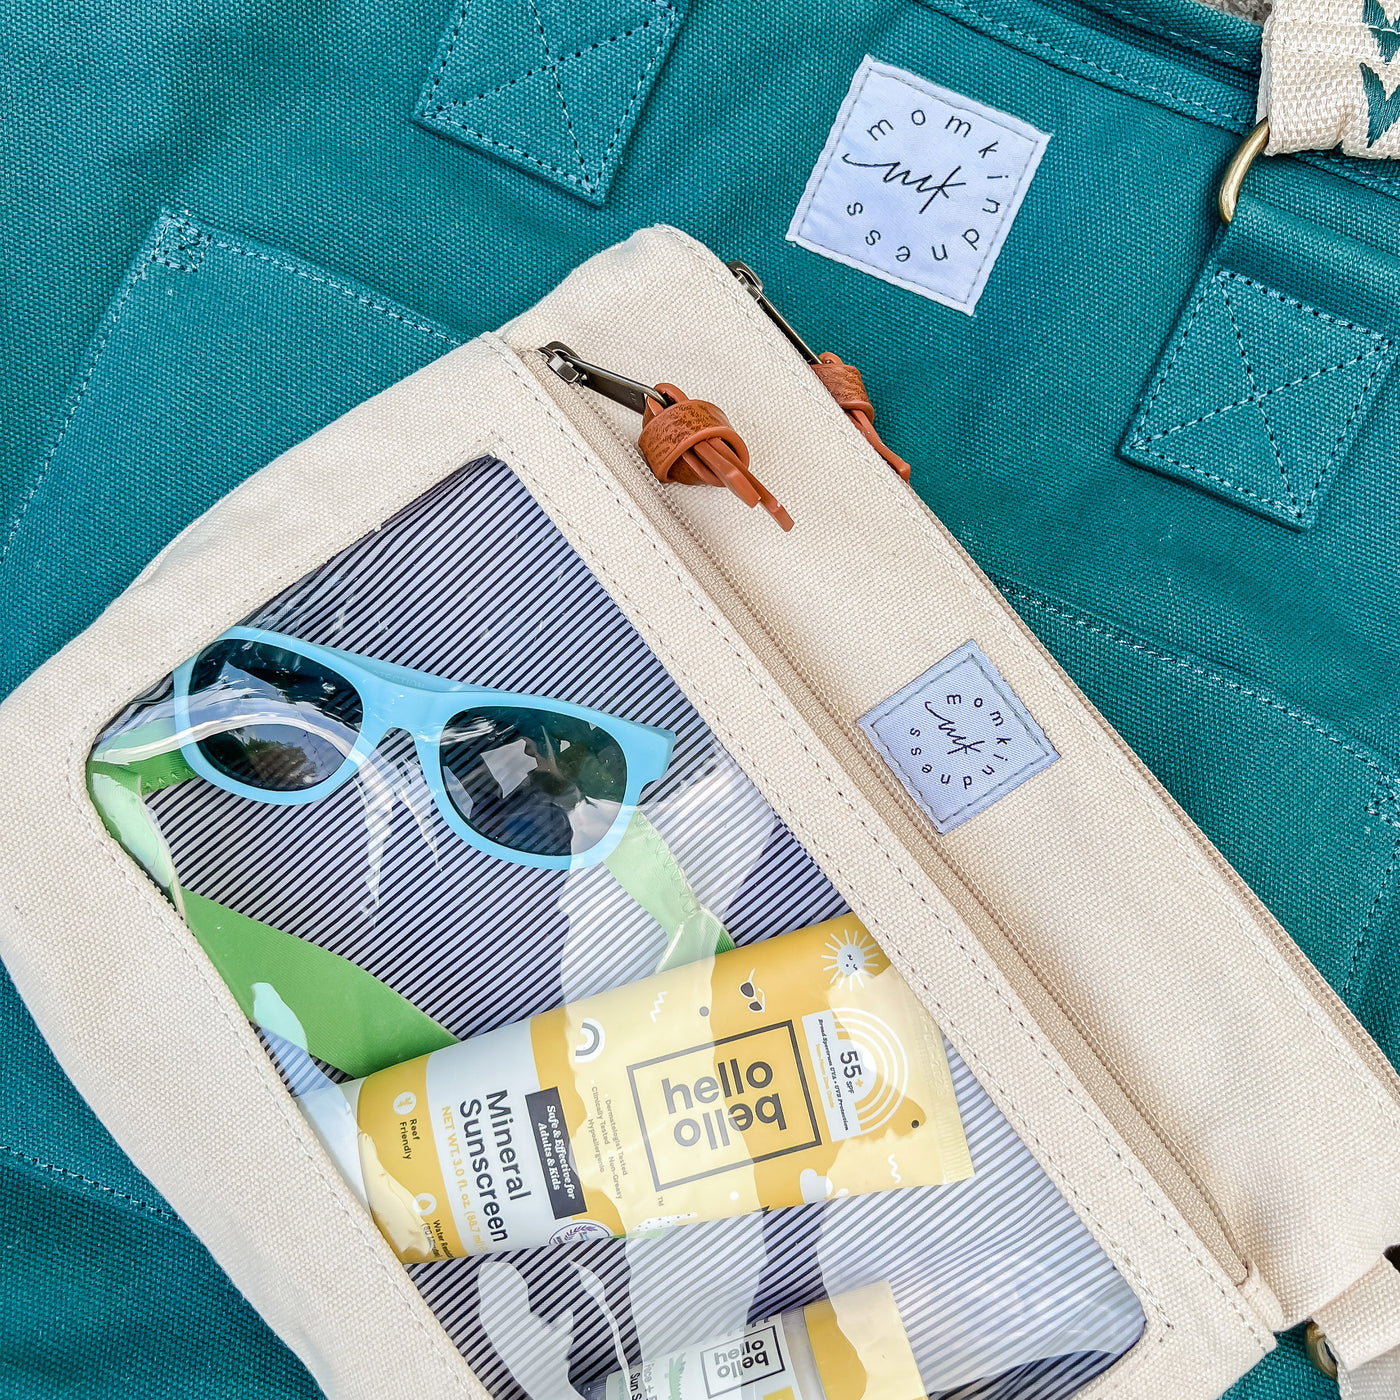 Dusty Blue Zipper Pouch: Essential Organizer for Everyday Use